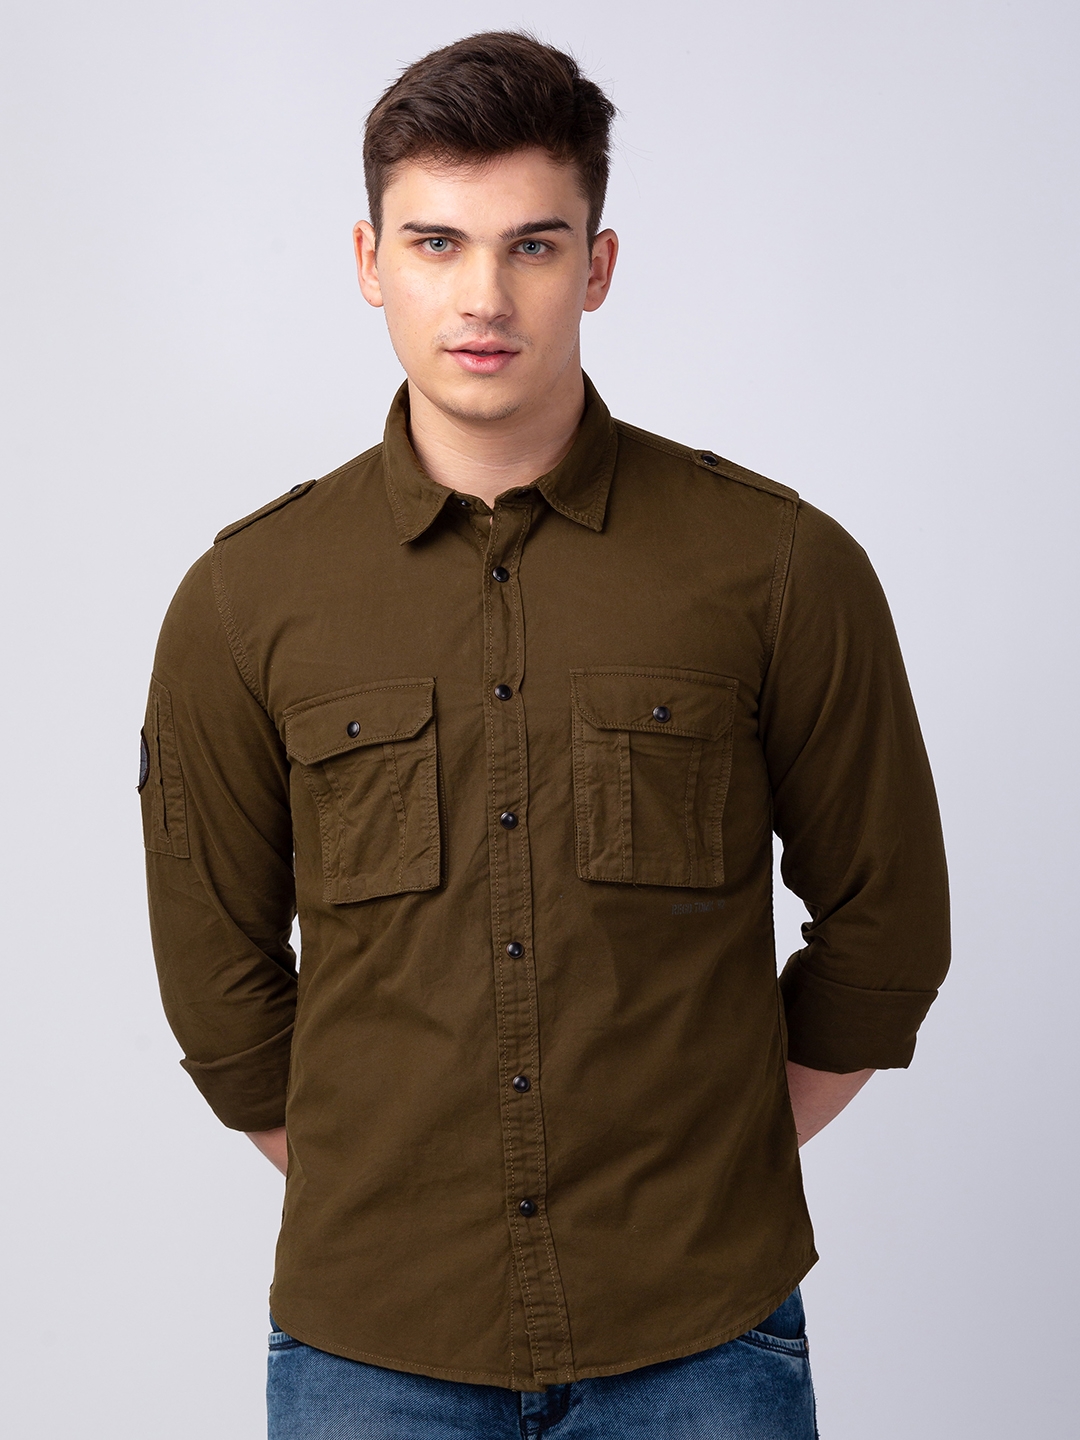 Spykar | Men's Brown Cotton Solid Casual Shirts 0